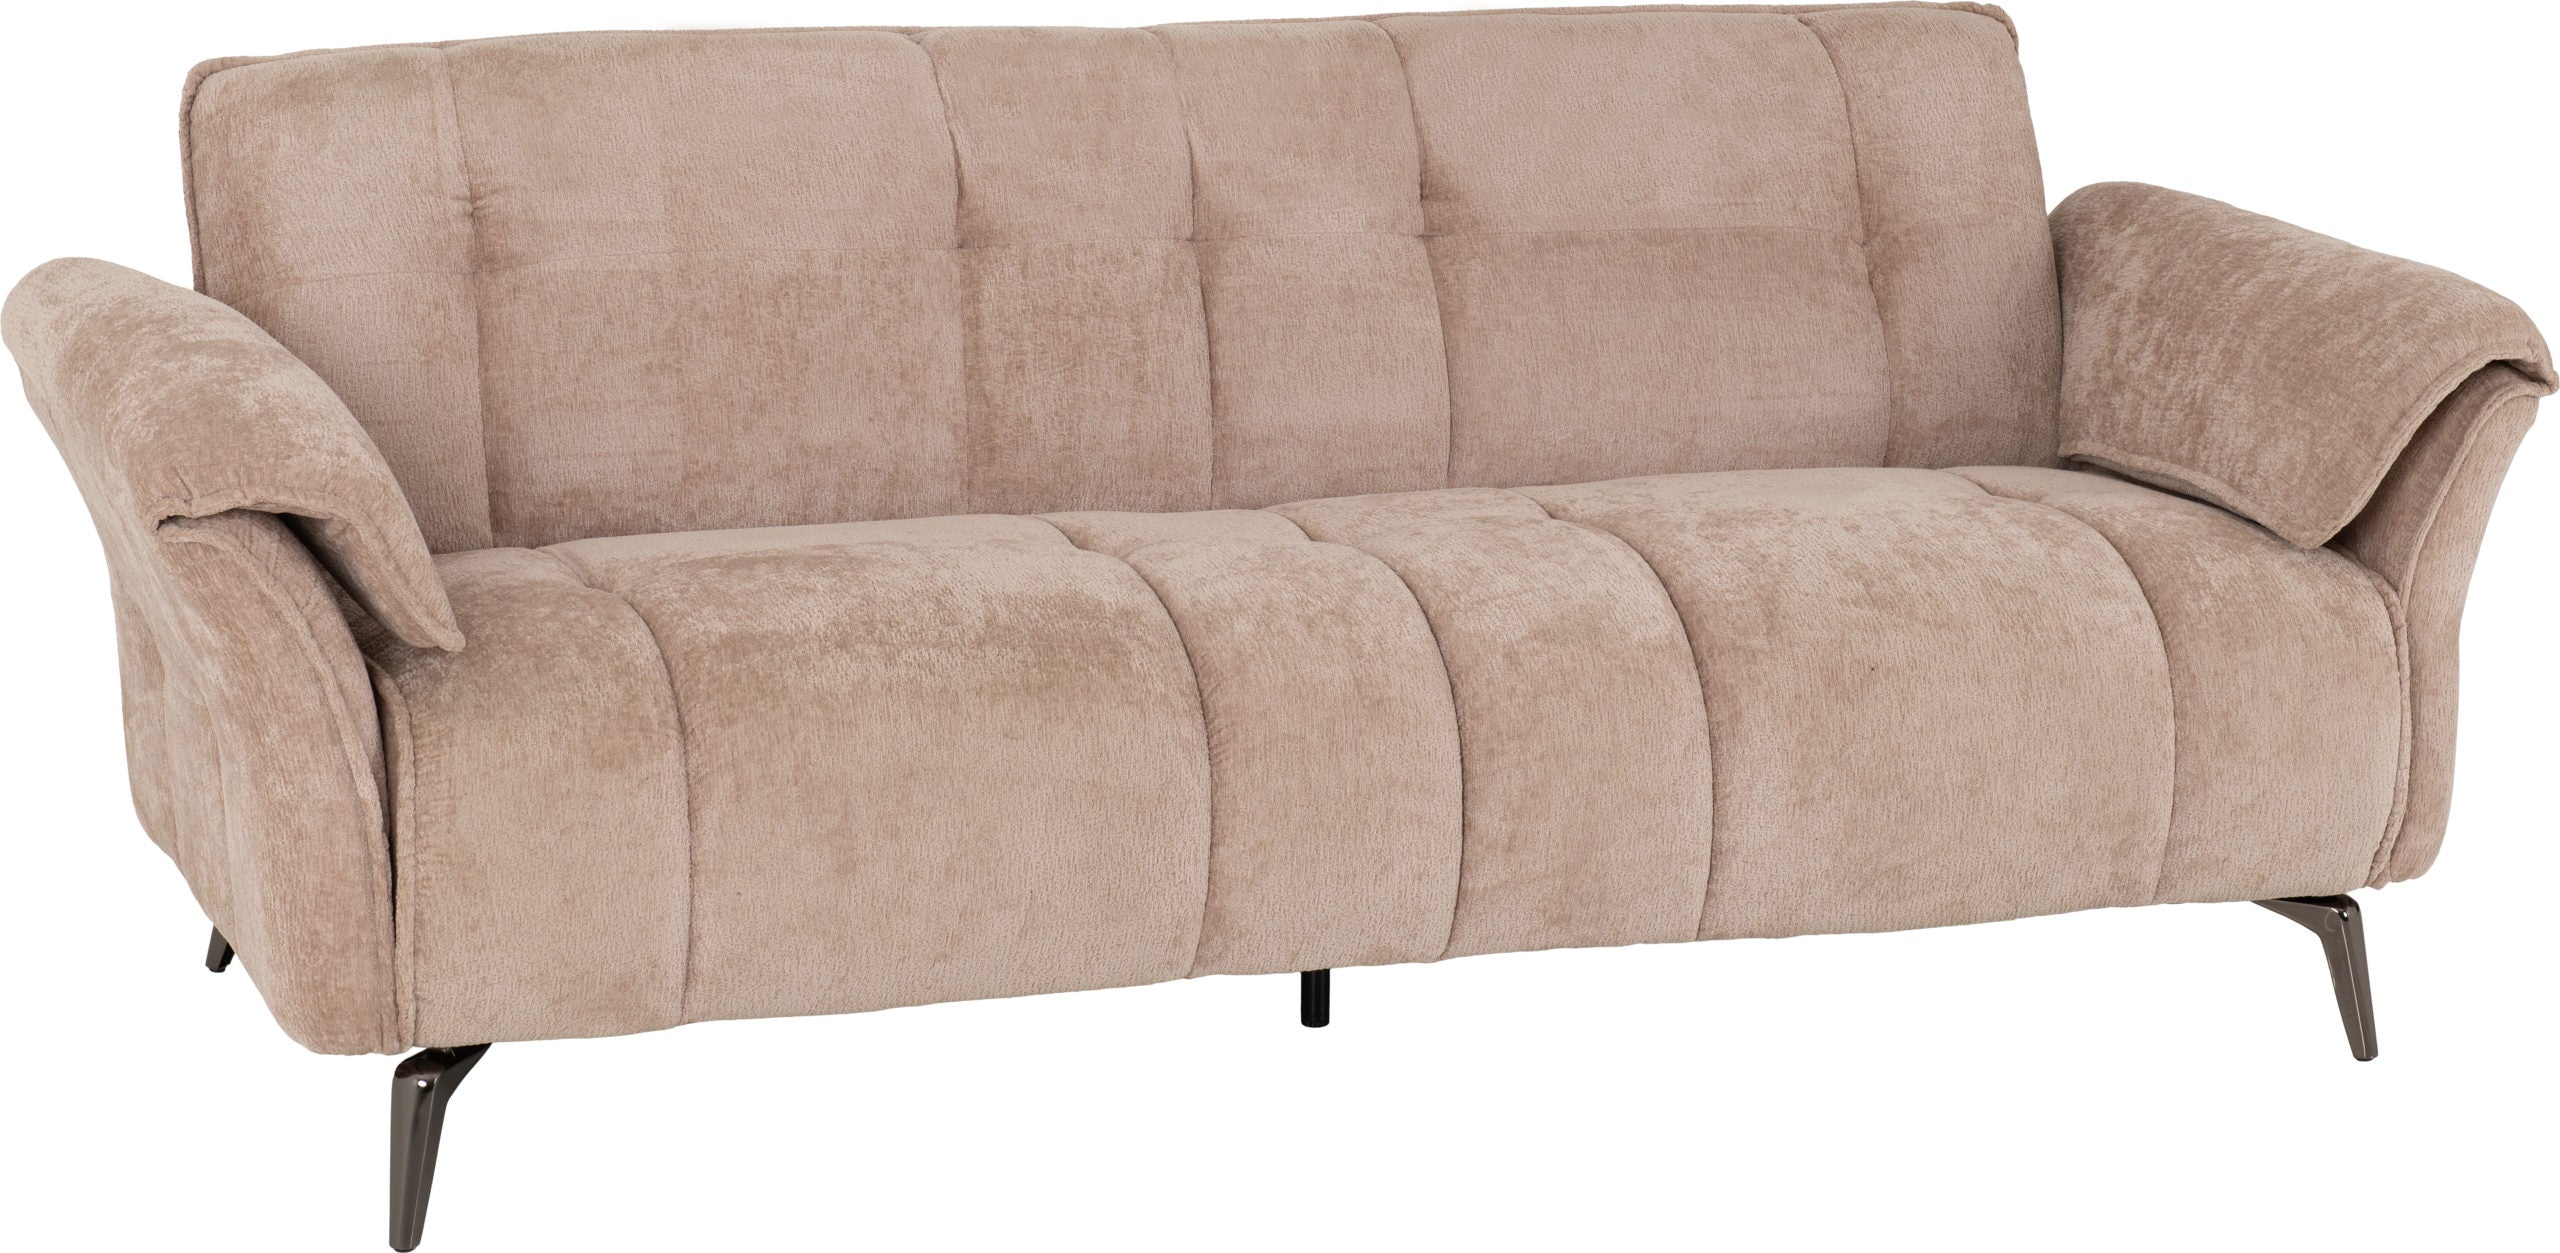 Amalfi 3 Seater Sofa in Champagne Fabric with Metal Legs 2 Man Delivery